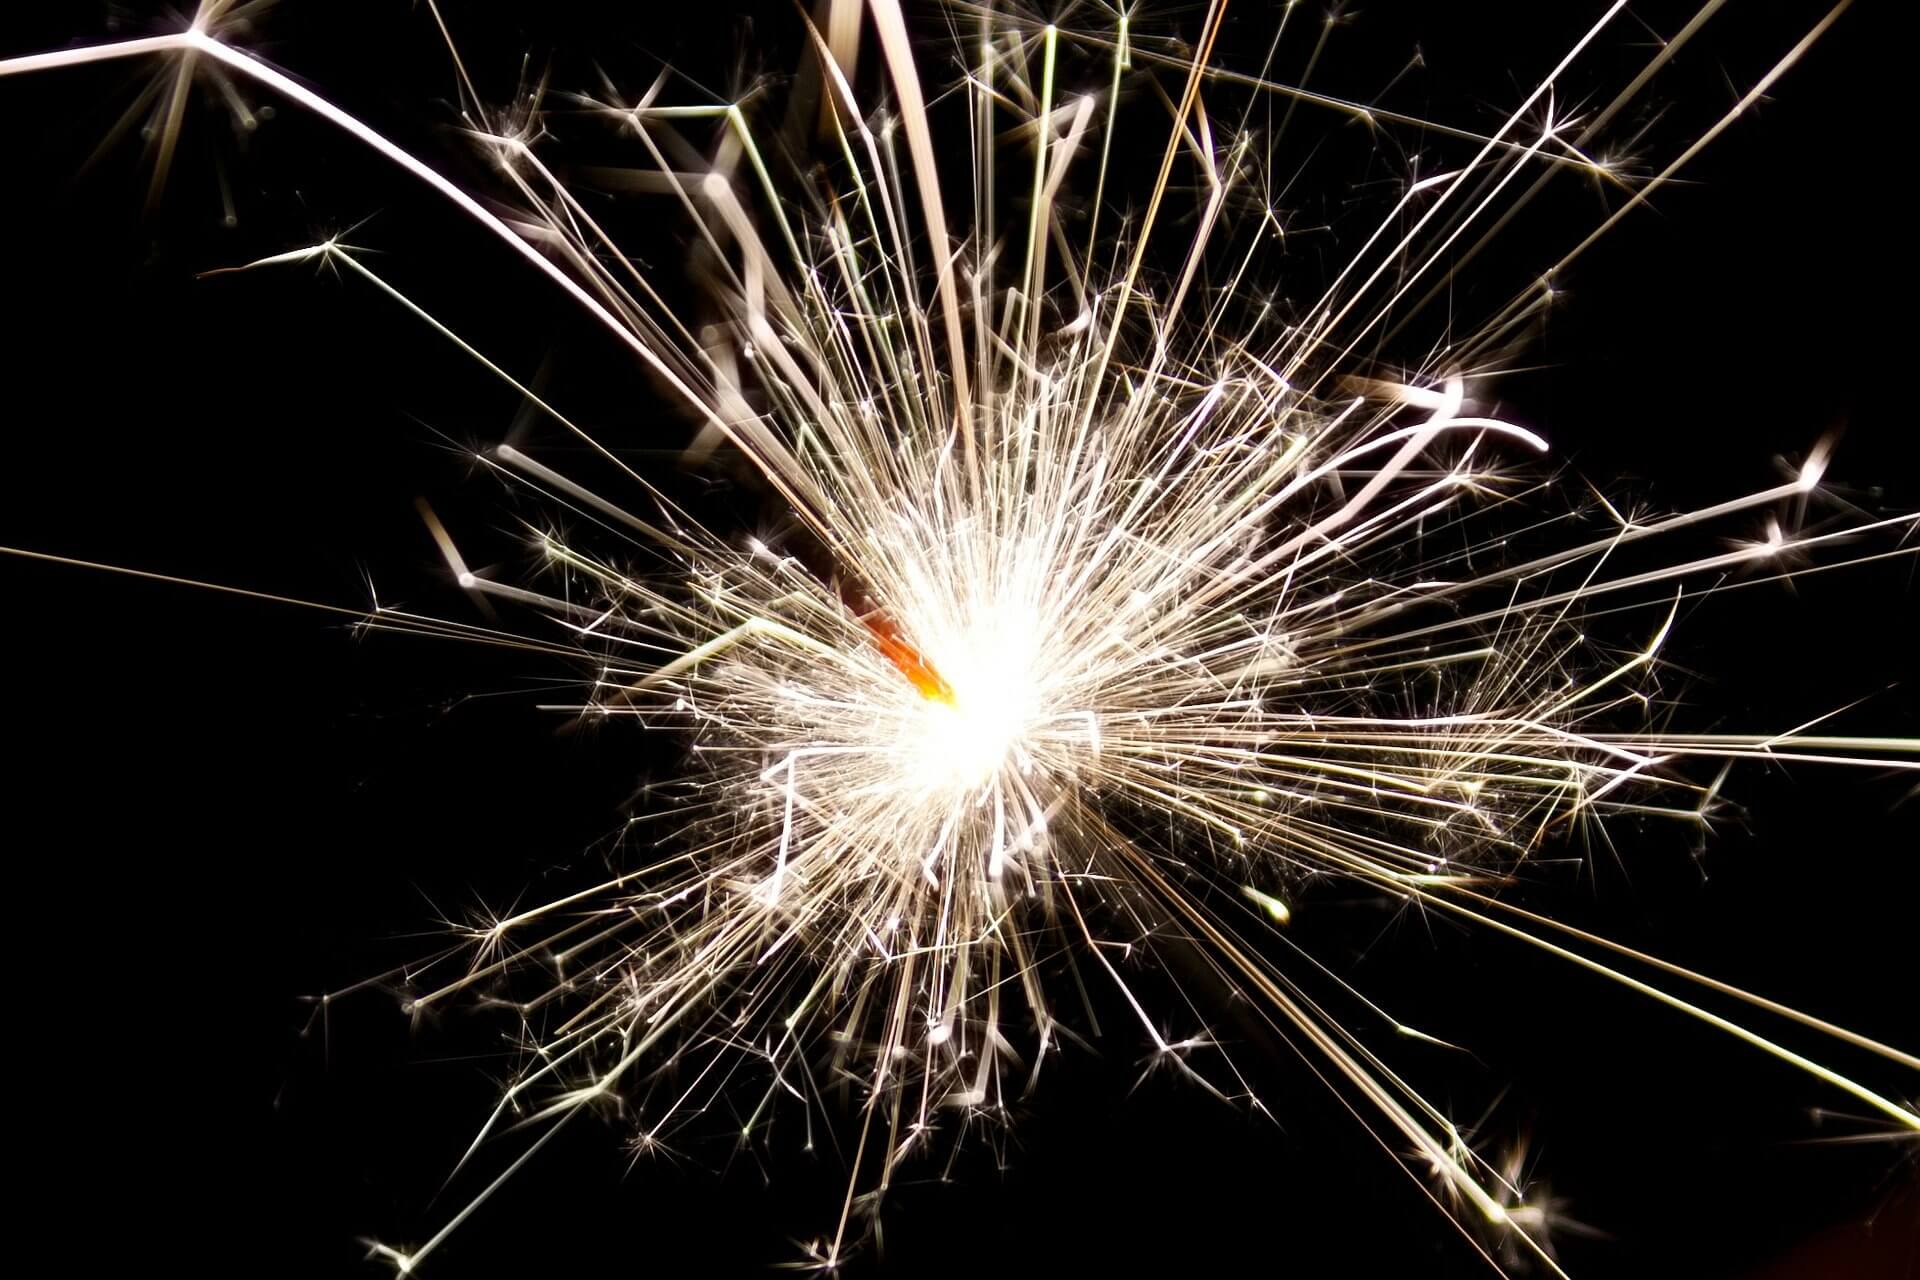 4 Things You SHOULDN’T Do When Handling Fireworks